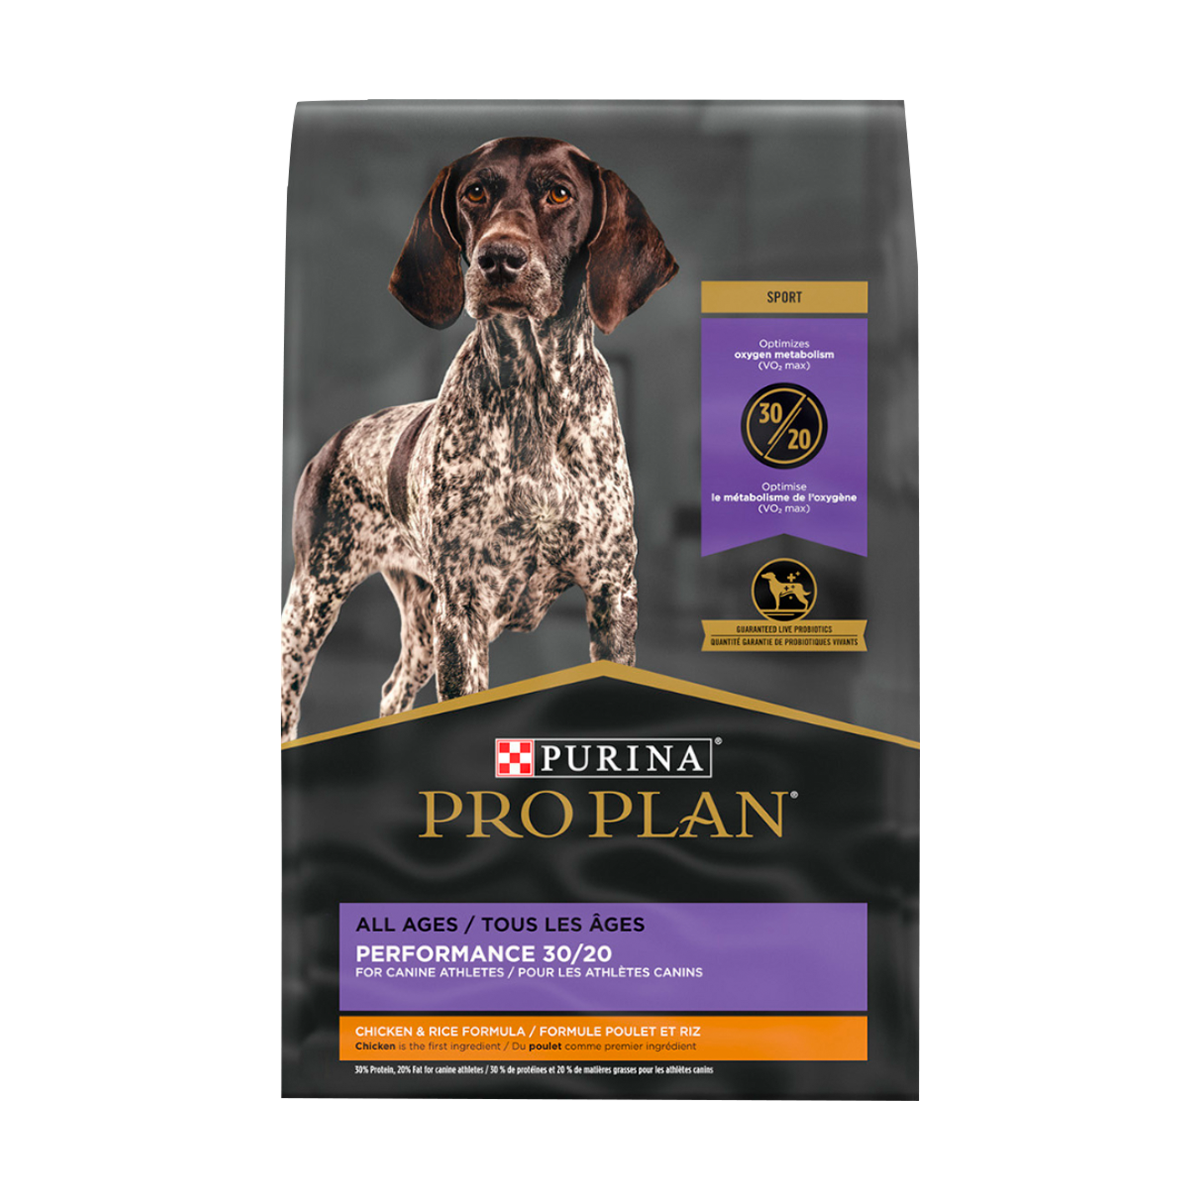 ProPlan_TT_Dog_performance__all_age30_20.png